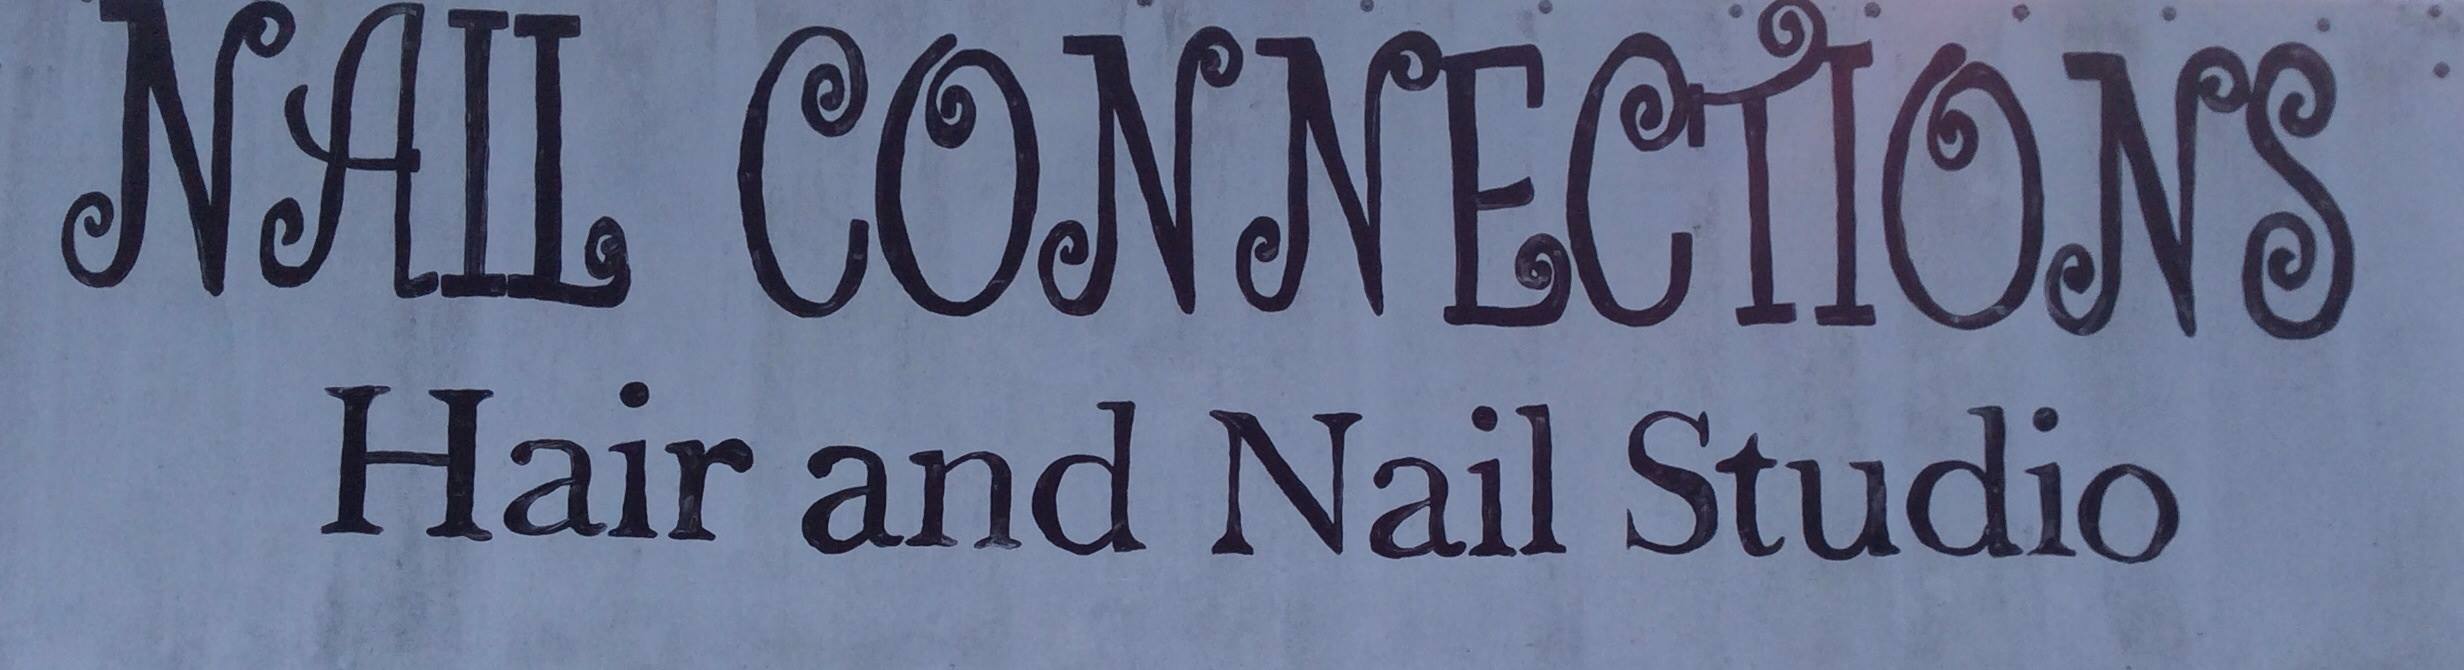 Nail Connections